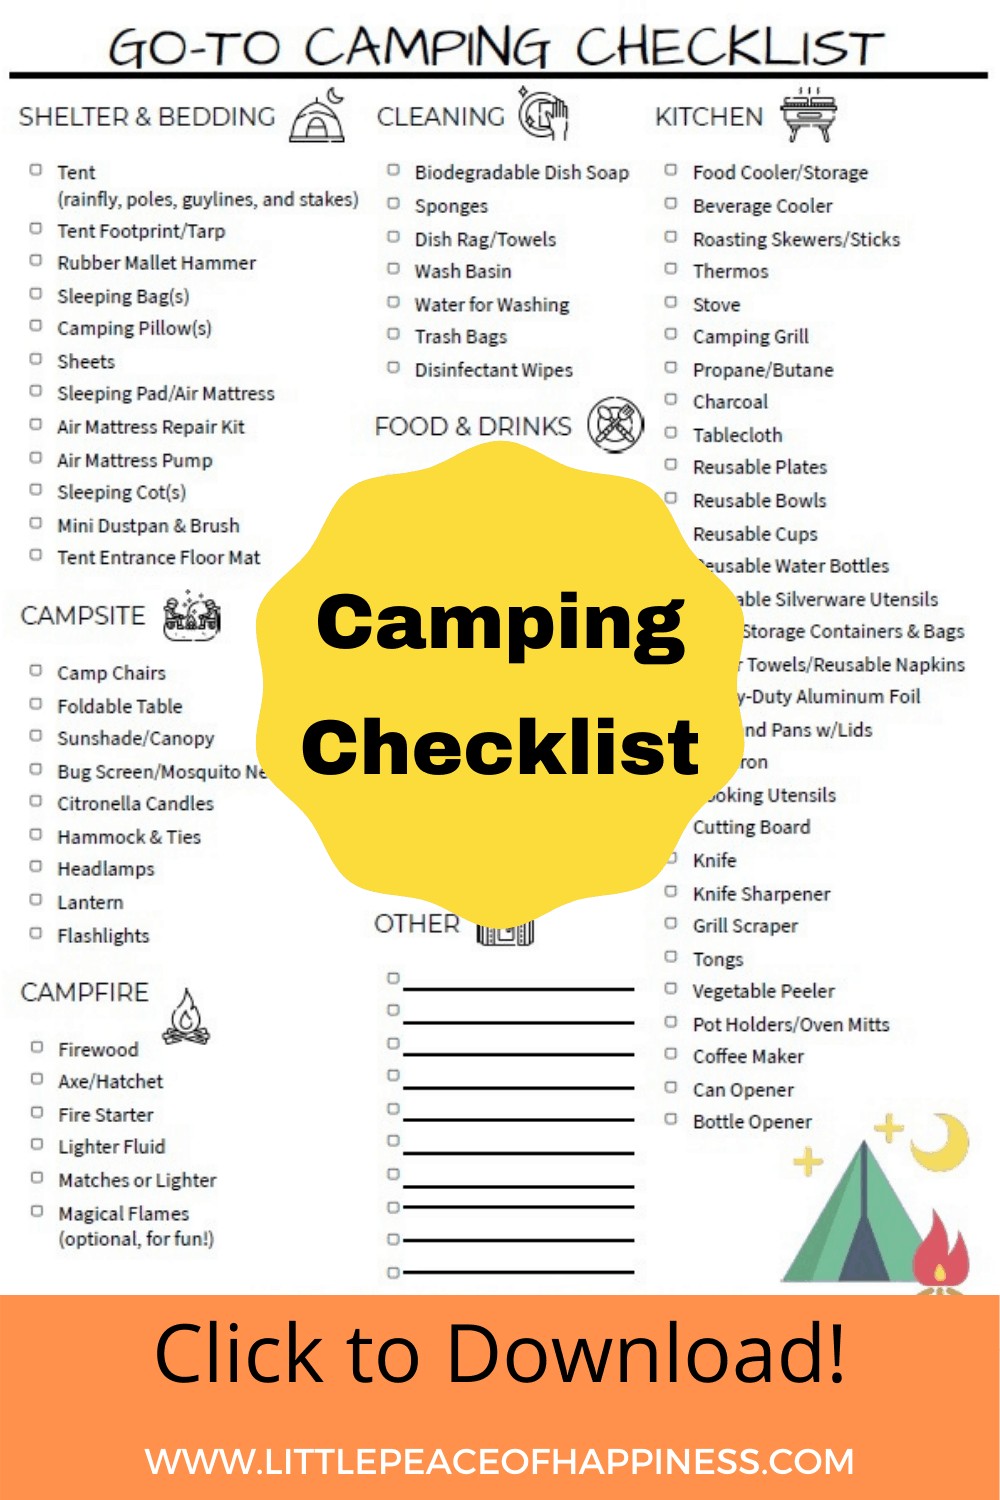 Camping must haves and camping checklist